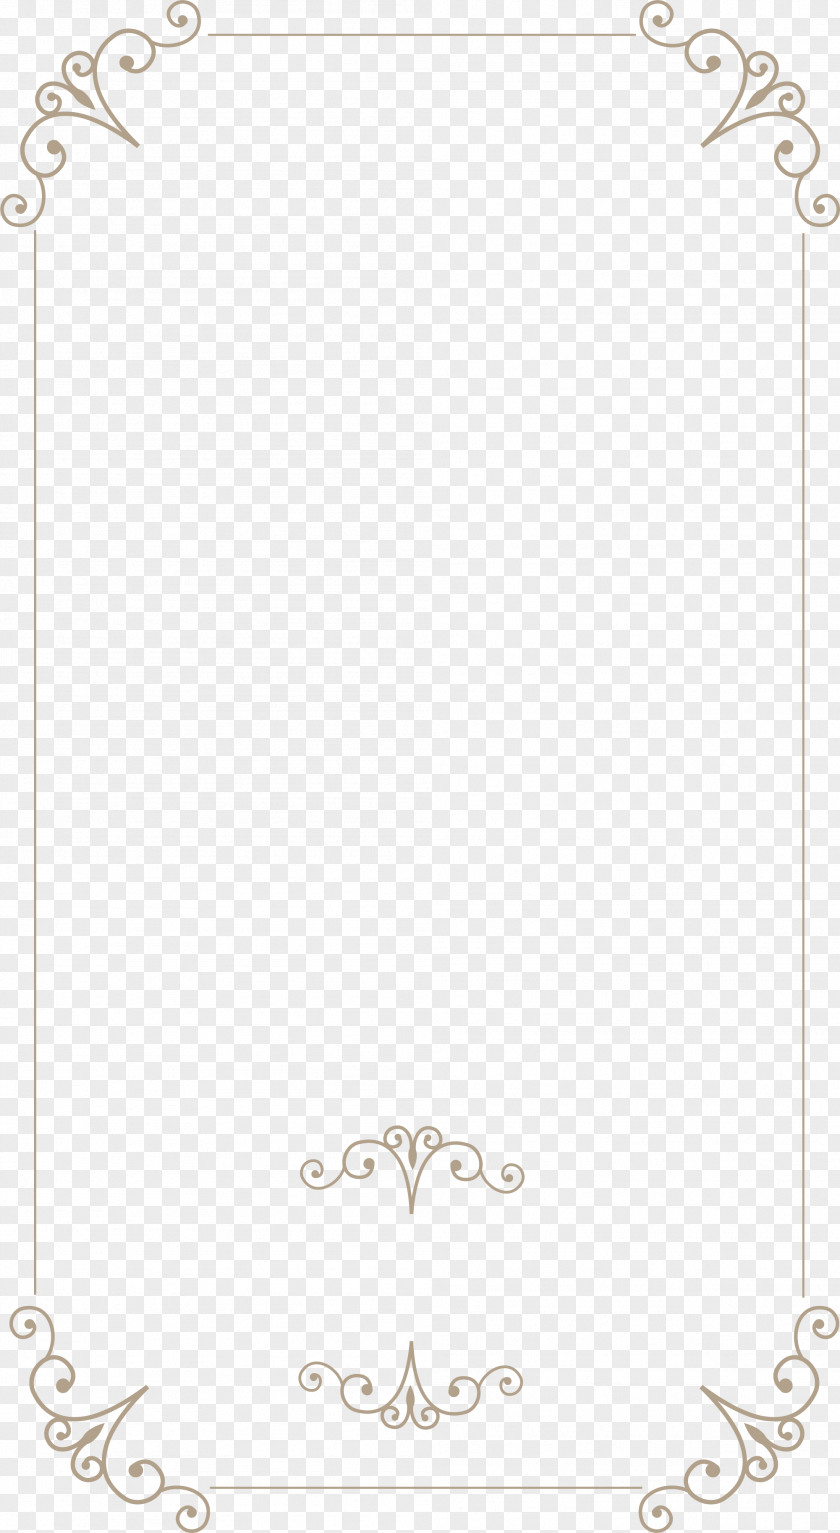 Simple Border PNG border clipart PNG